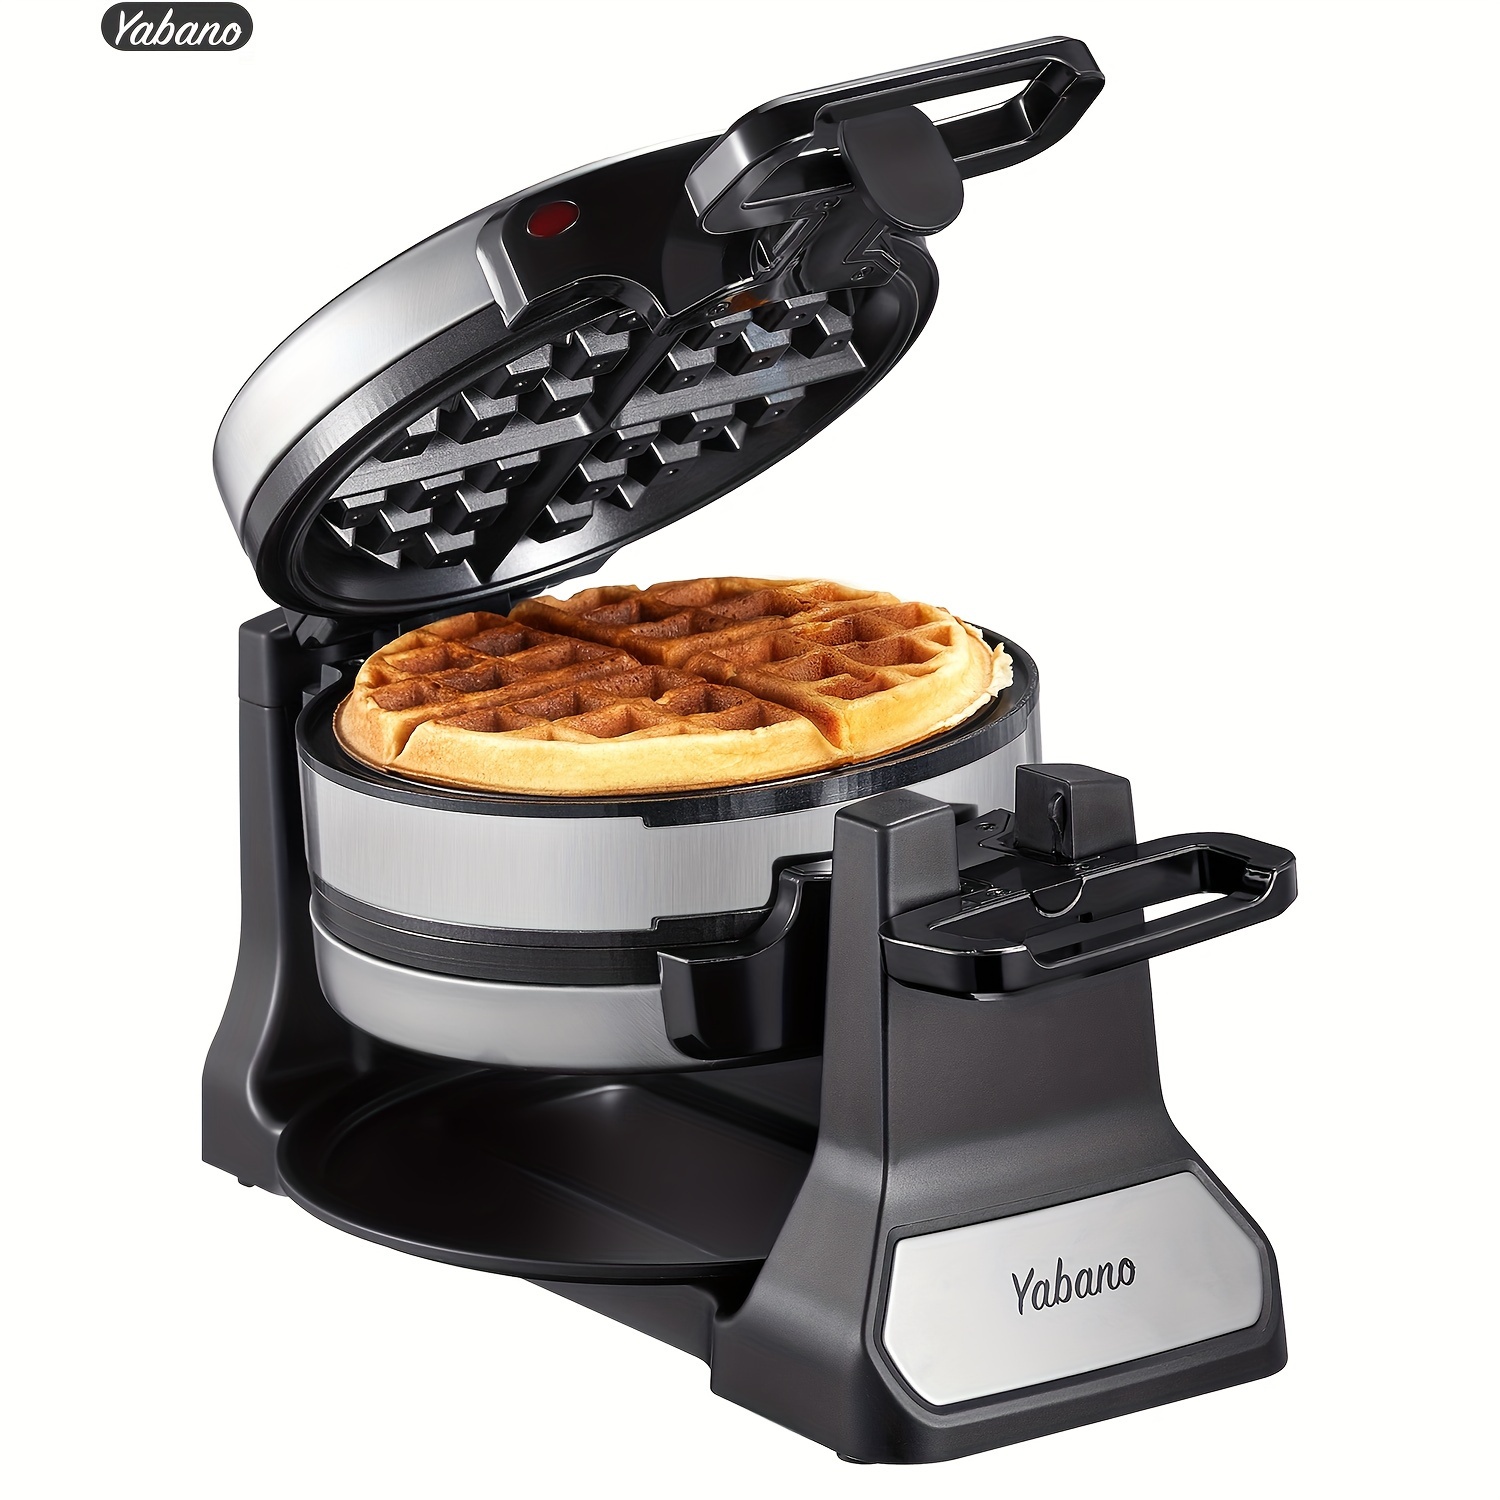 

Yabano Belgian Waffle Maker, Classic Rotating With Nonstick Plates, Removable Drip Tray And Cool Touch Handles, Double Flip Waffle, Rotating Belgium Waflera Maker By Yabano, Brushed Stainless